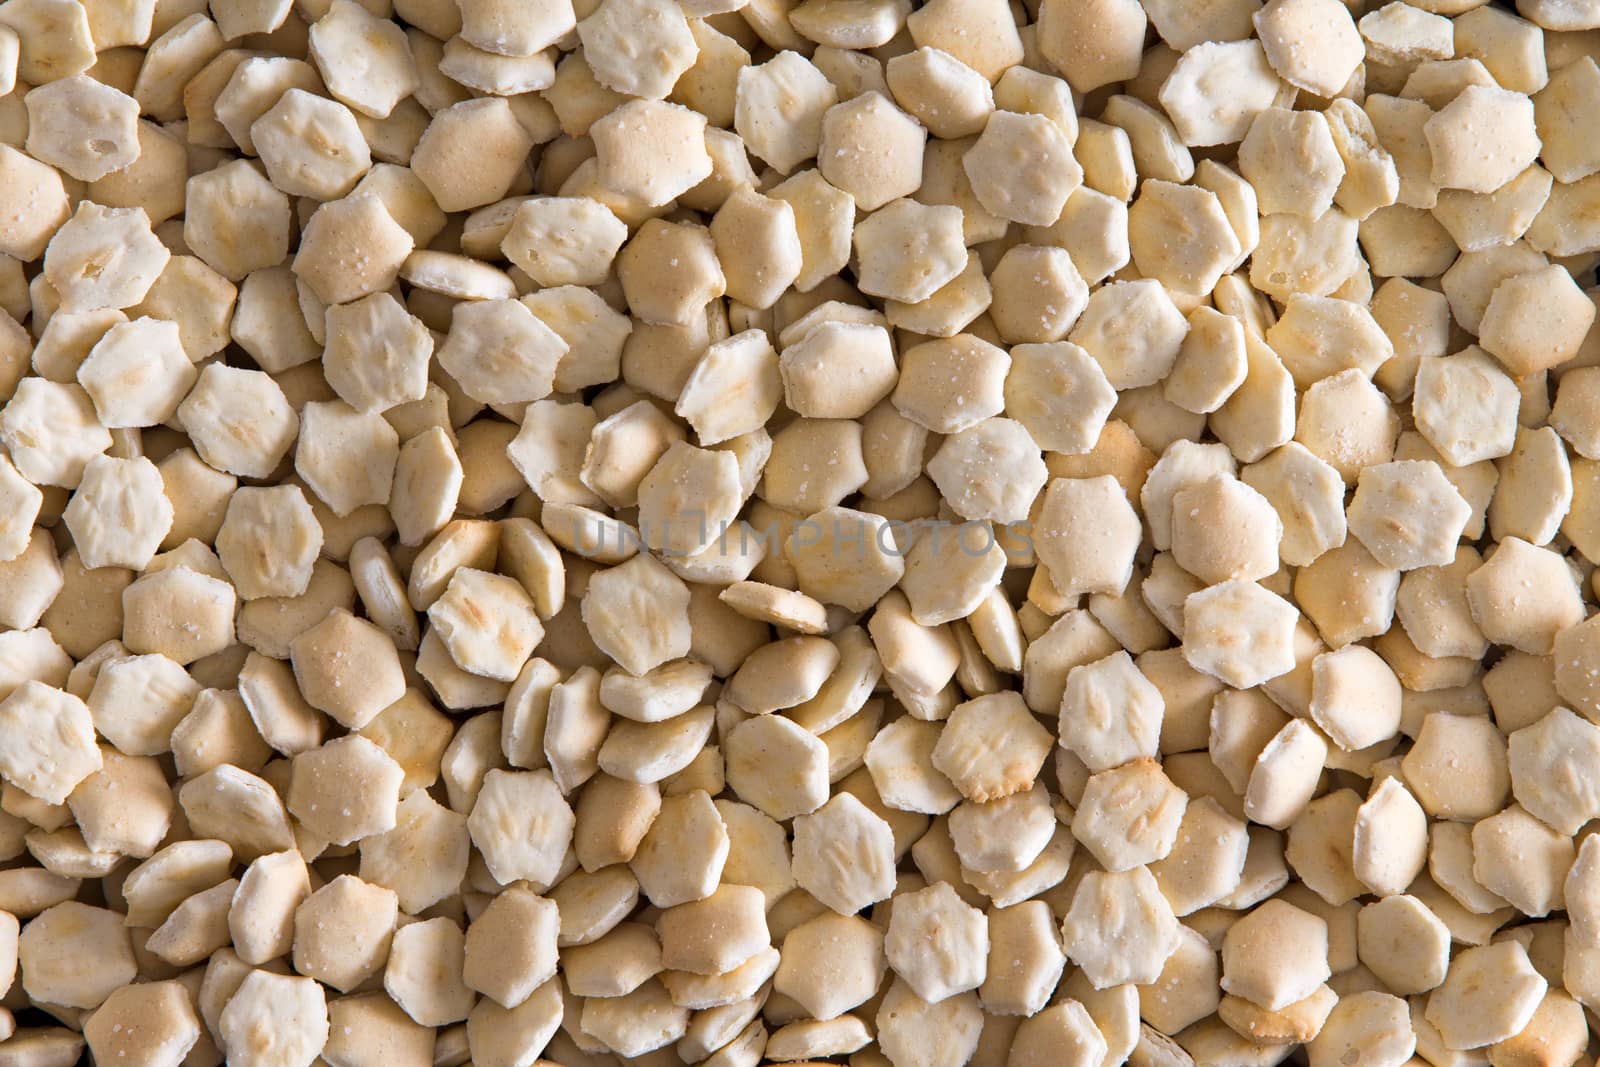 Background texture of small oven-baked oyster crackers usually served with soup in a full frame closeup view from above